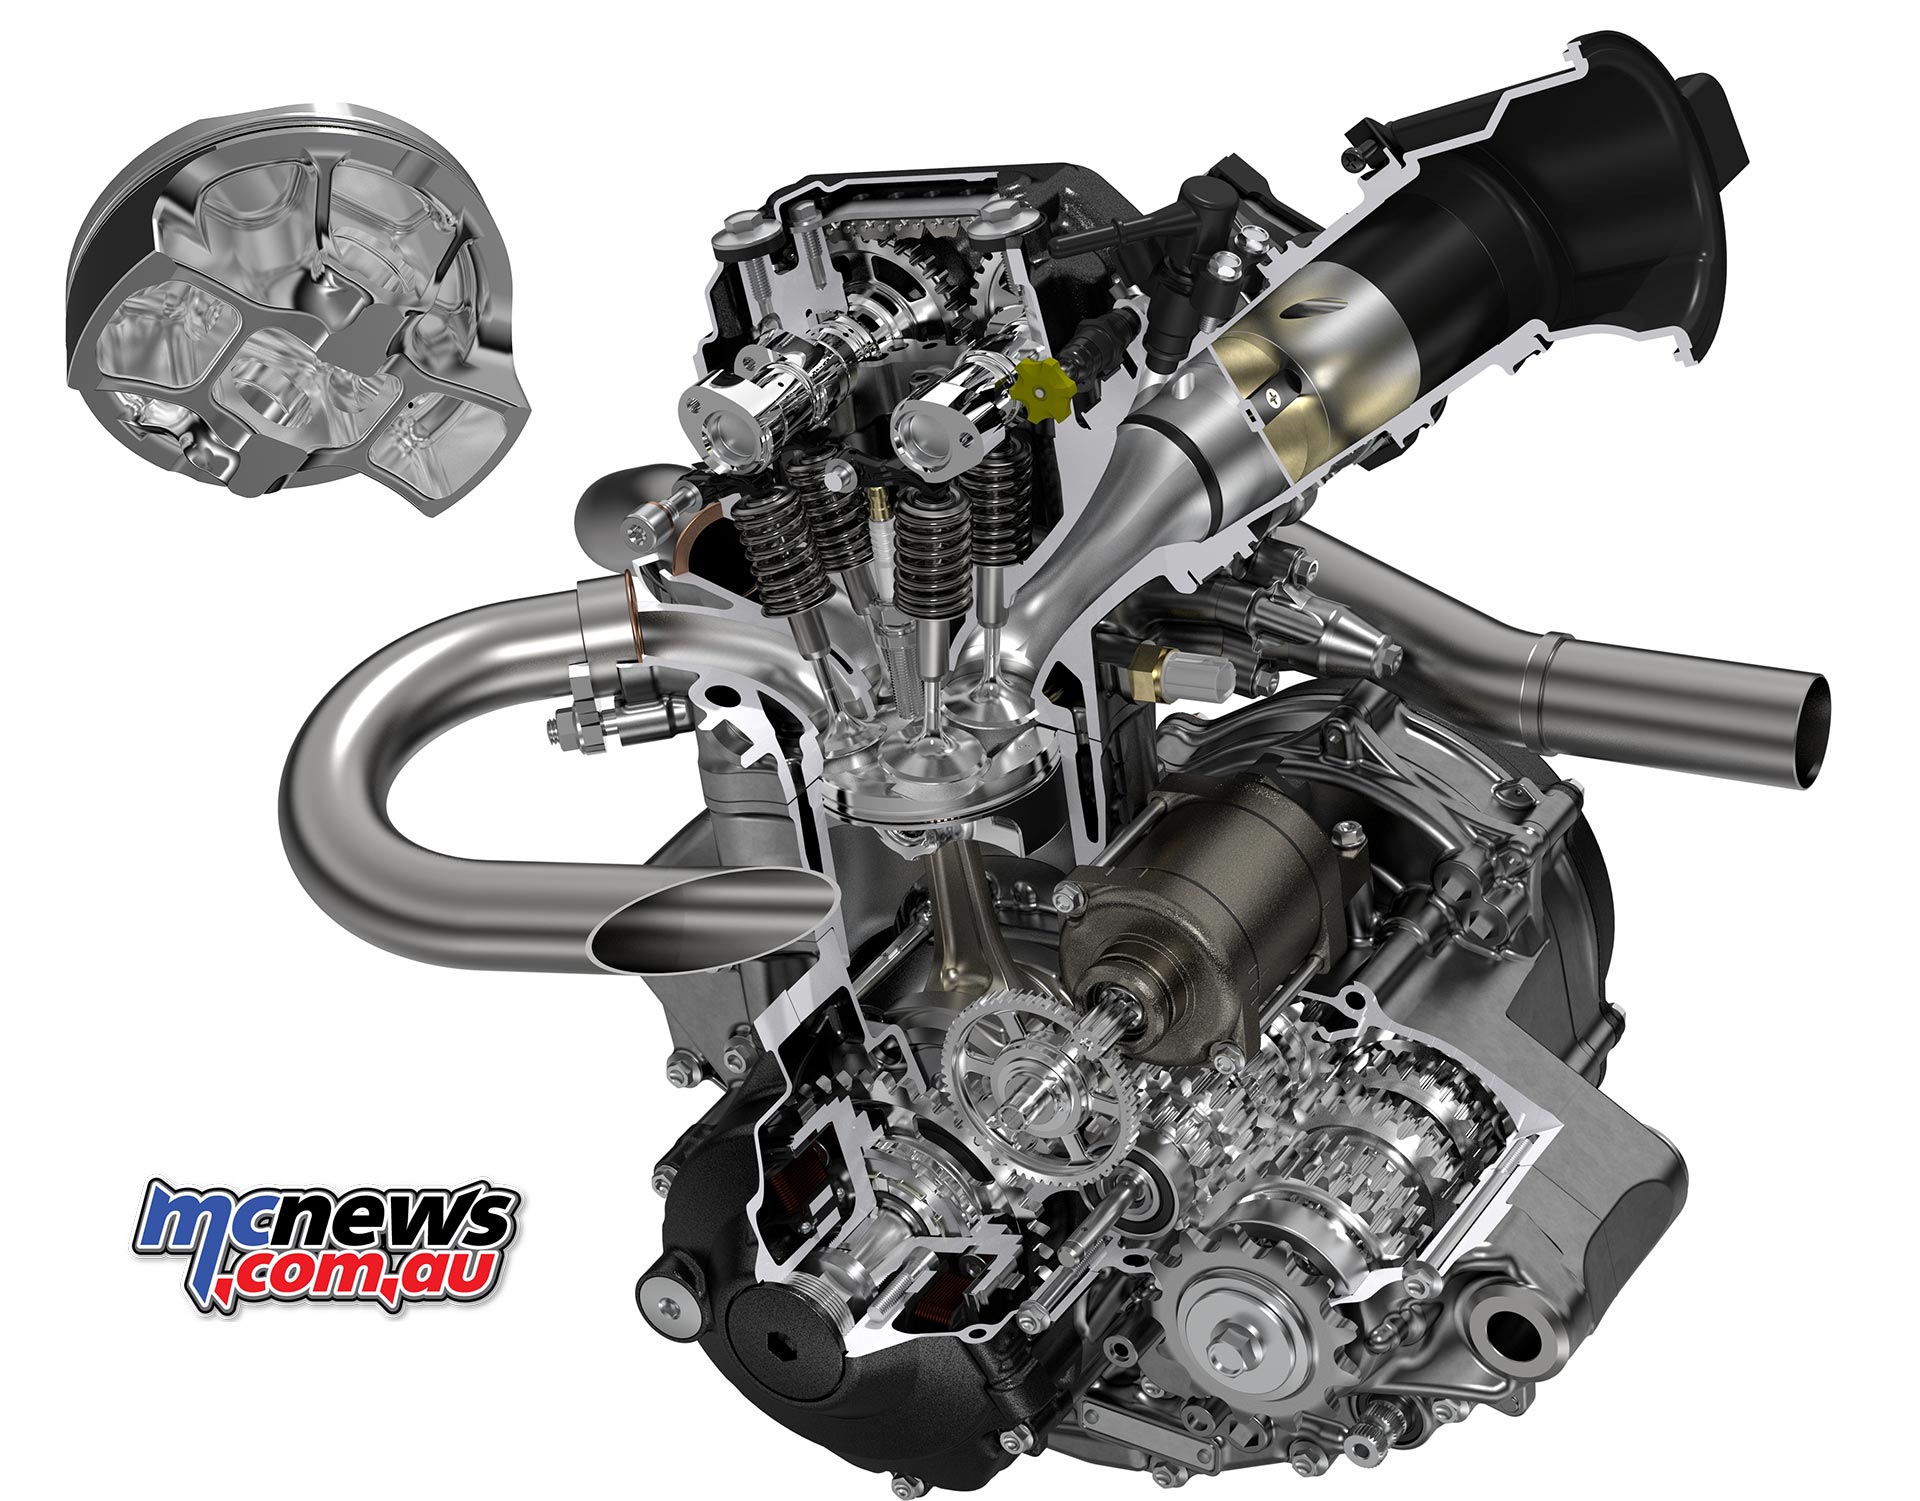 2018 CRF250R New DOHC Engine CRF450R Chassis MCNews